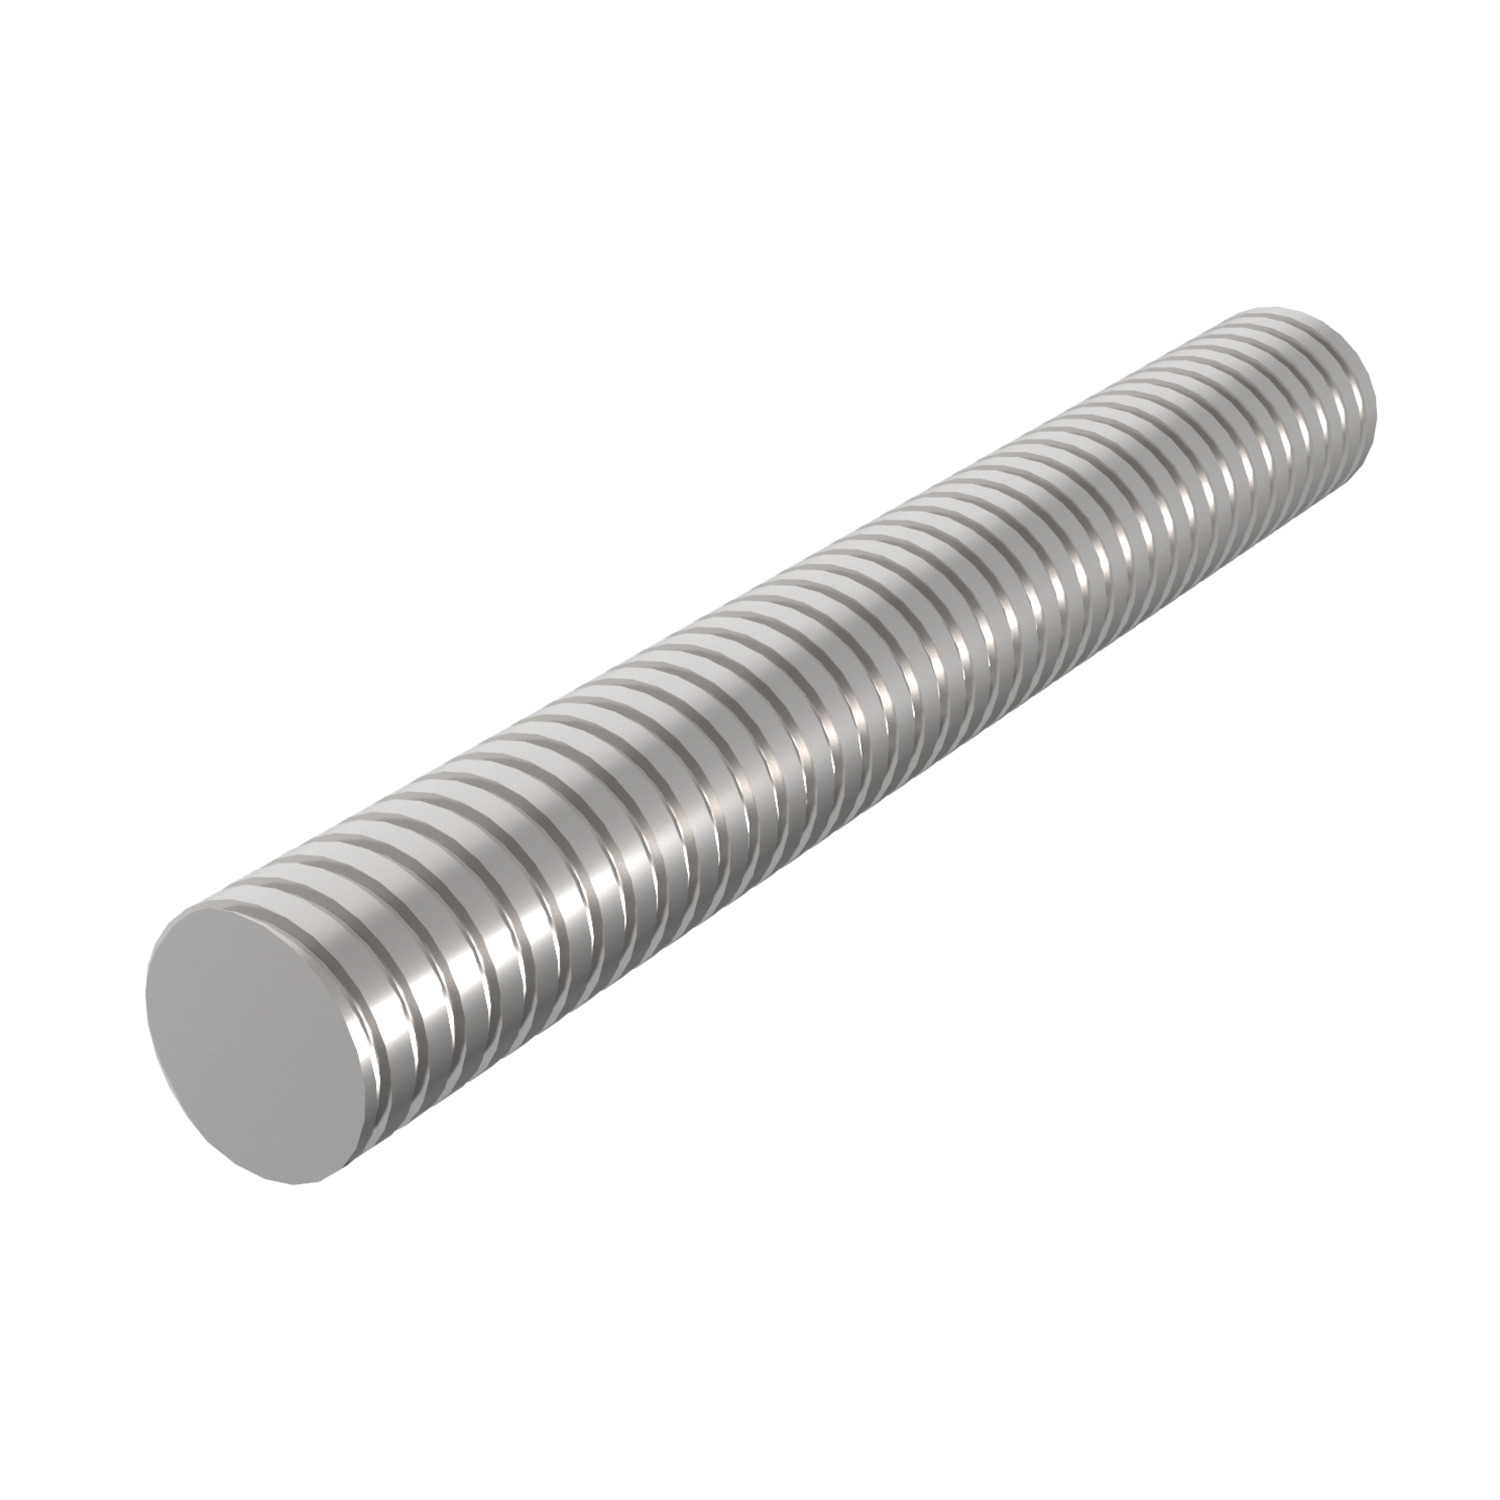 Steel Lead Screws Rolled trapezoidal C45 steel lead screws, right hand thread.  Lengths of up to 6 meters can be provided. Tr 10 to Tr 120.